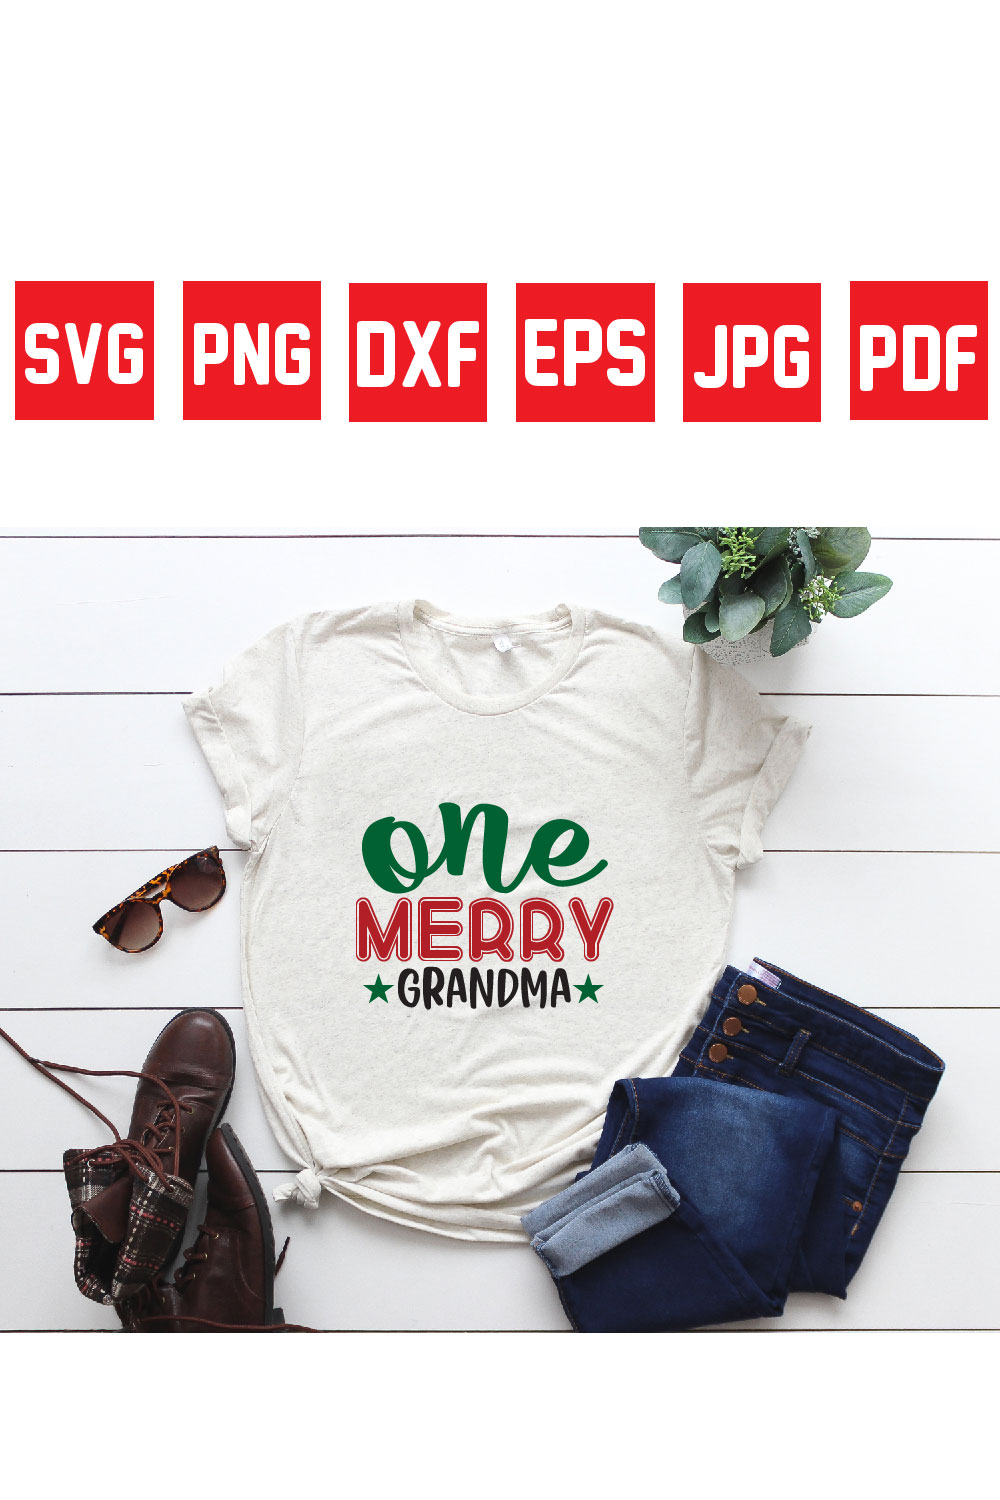 one merry grandma pinterest preview image.